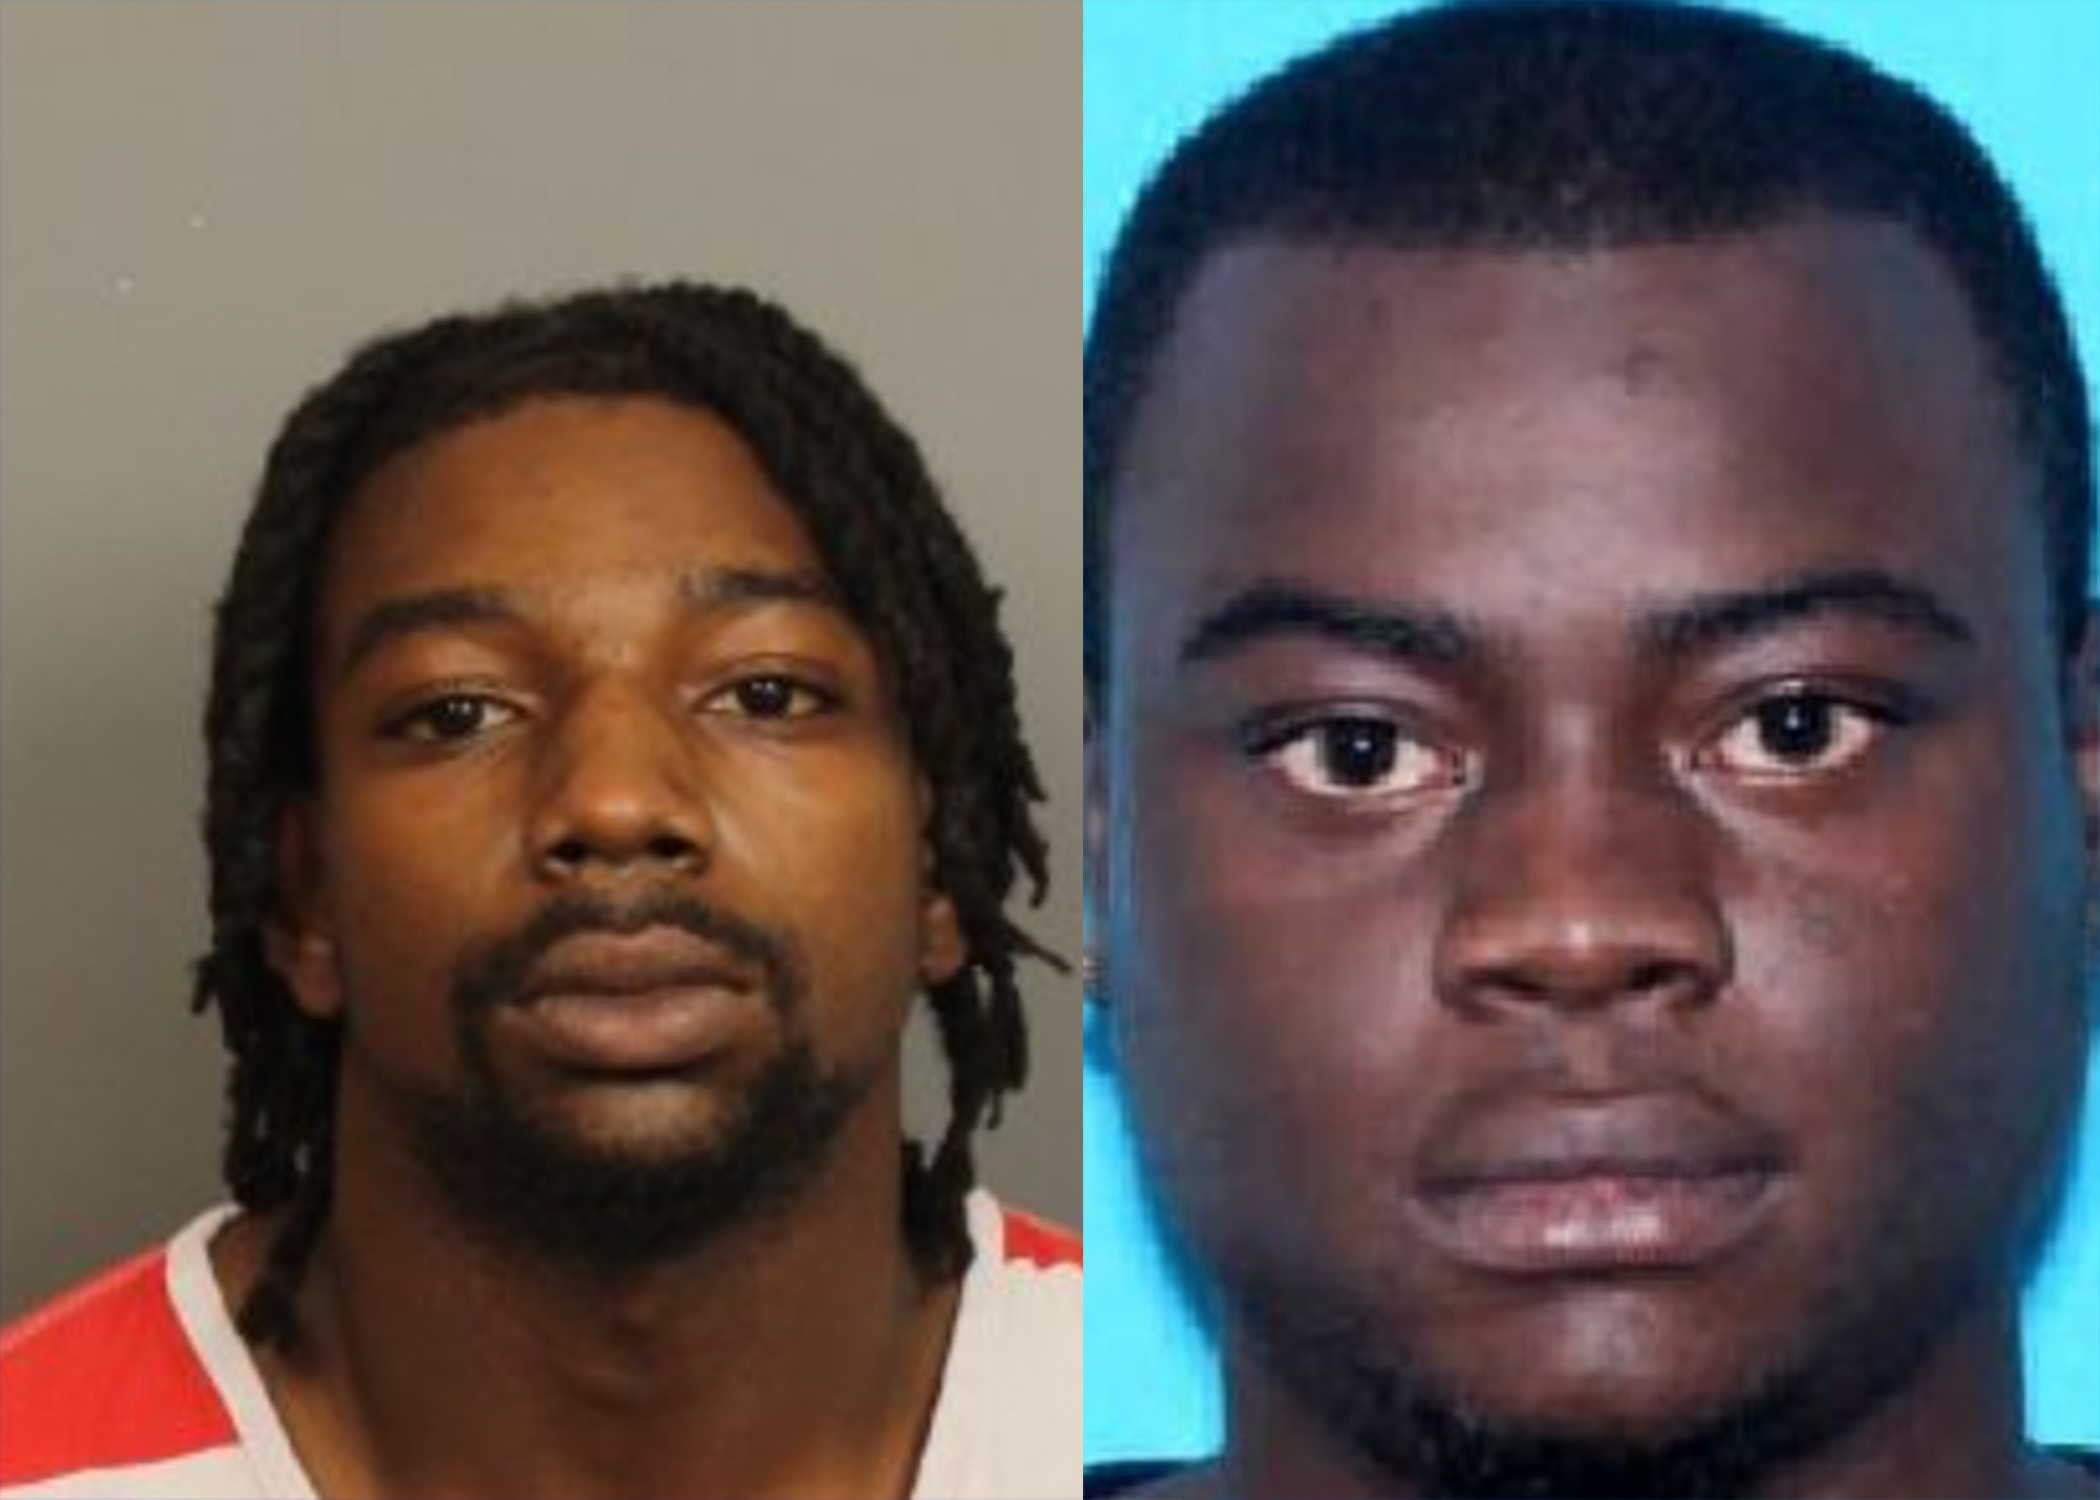 UPDATE: Two men charged with capital murder in Lipscomb homicide